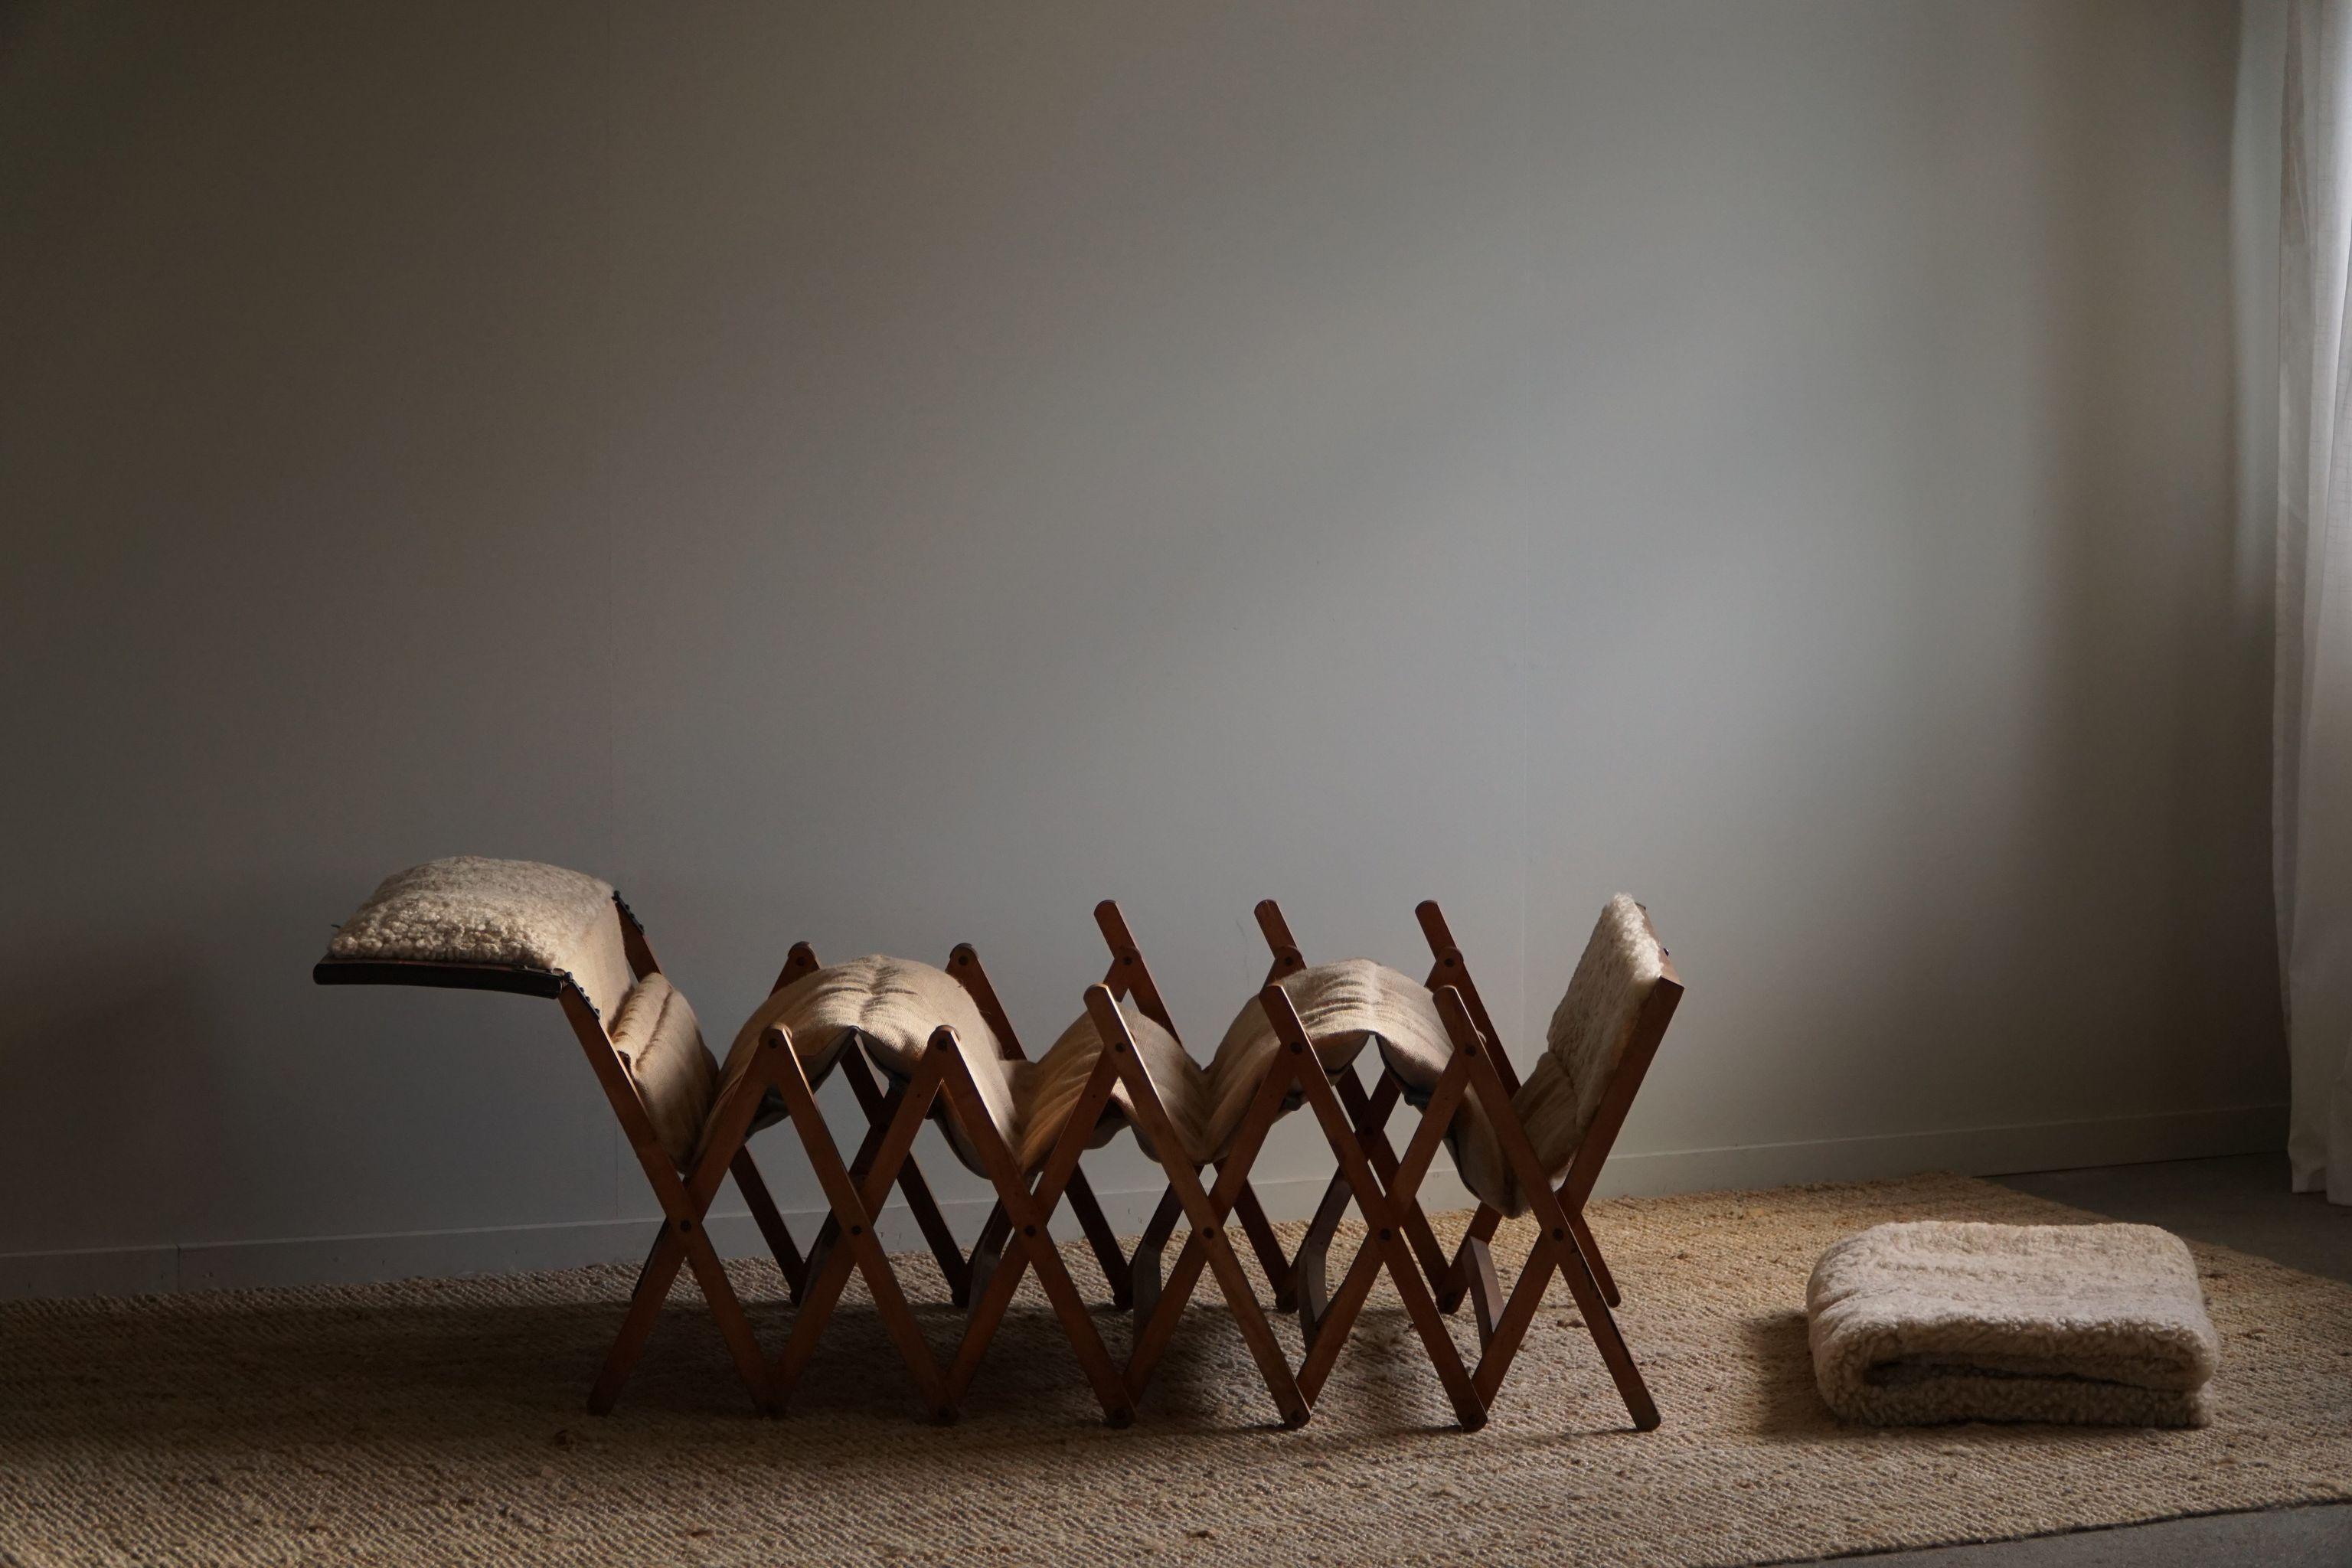 Folding Daybed in Hessian & Lambswool, Made by a Danish Cabinetmaker, 1930s For Sale 10